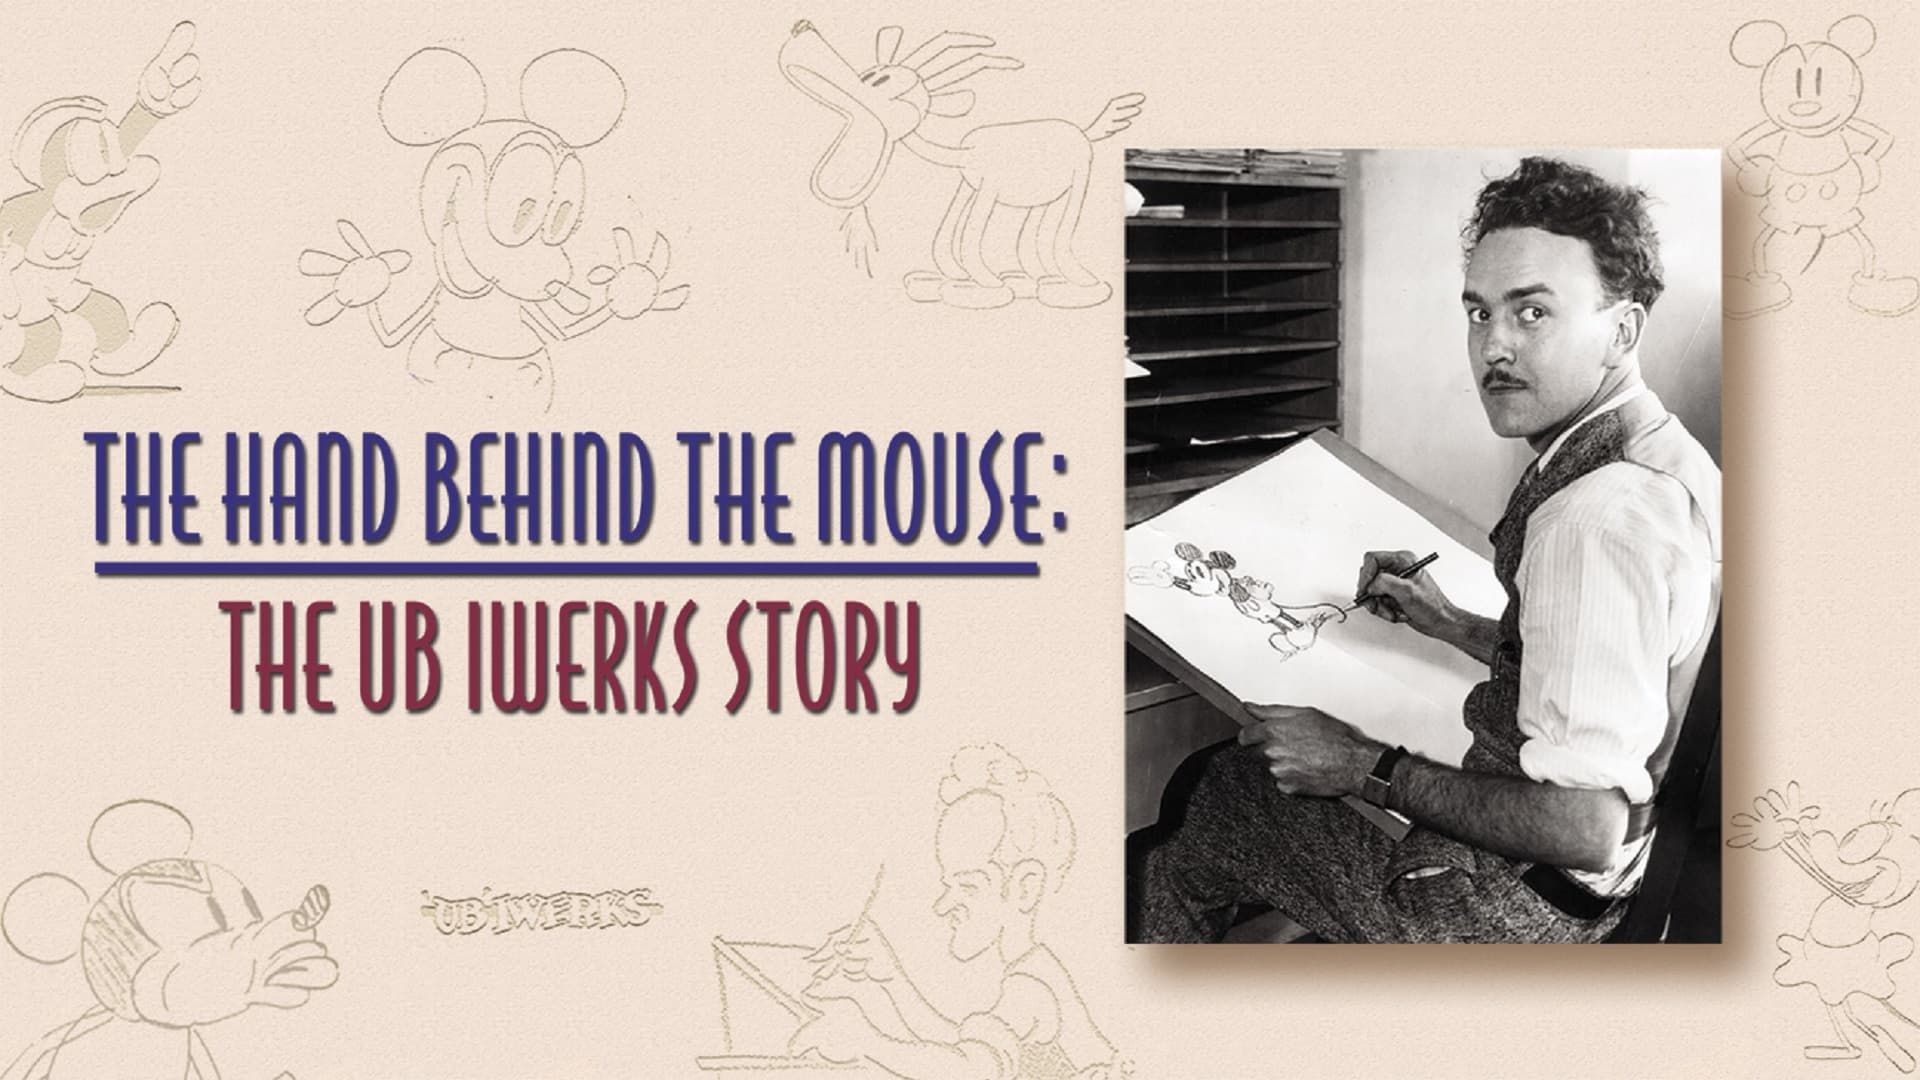 The Hand Behind the Mouse: The Ub Iwerks Story background